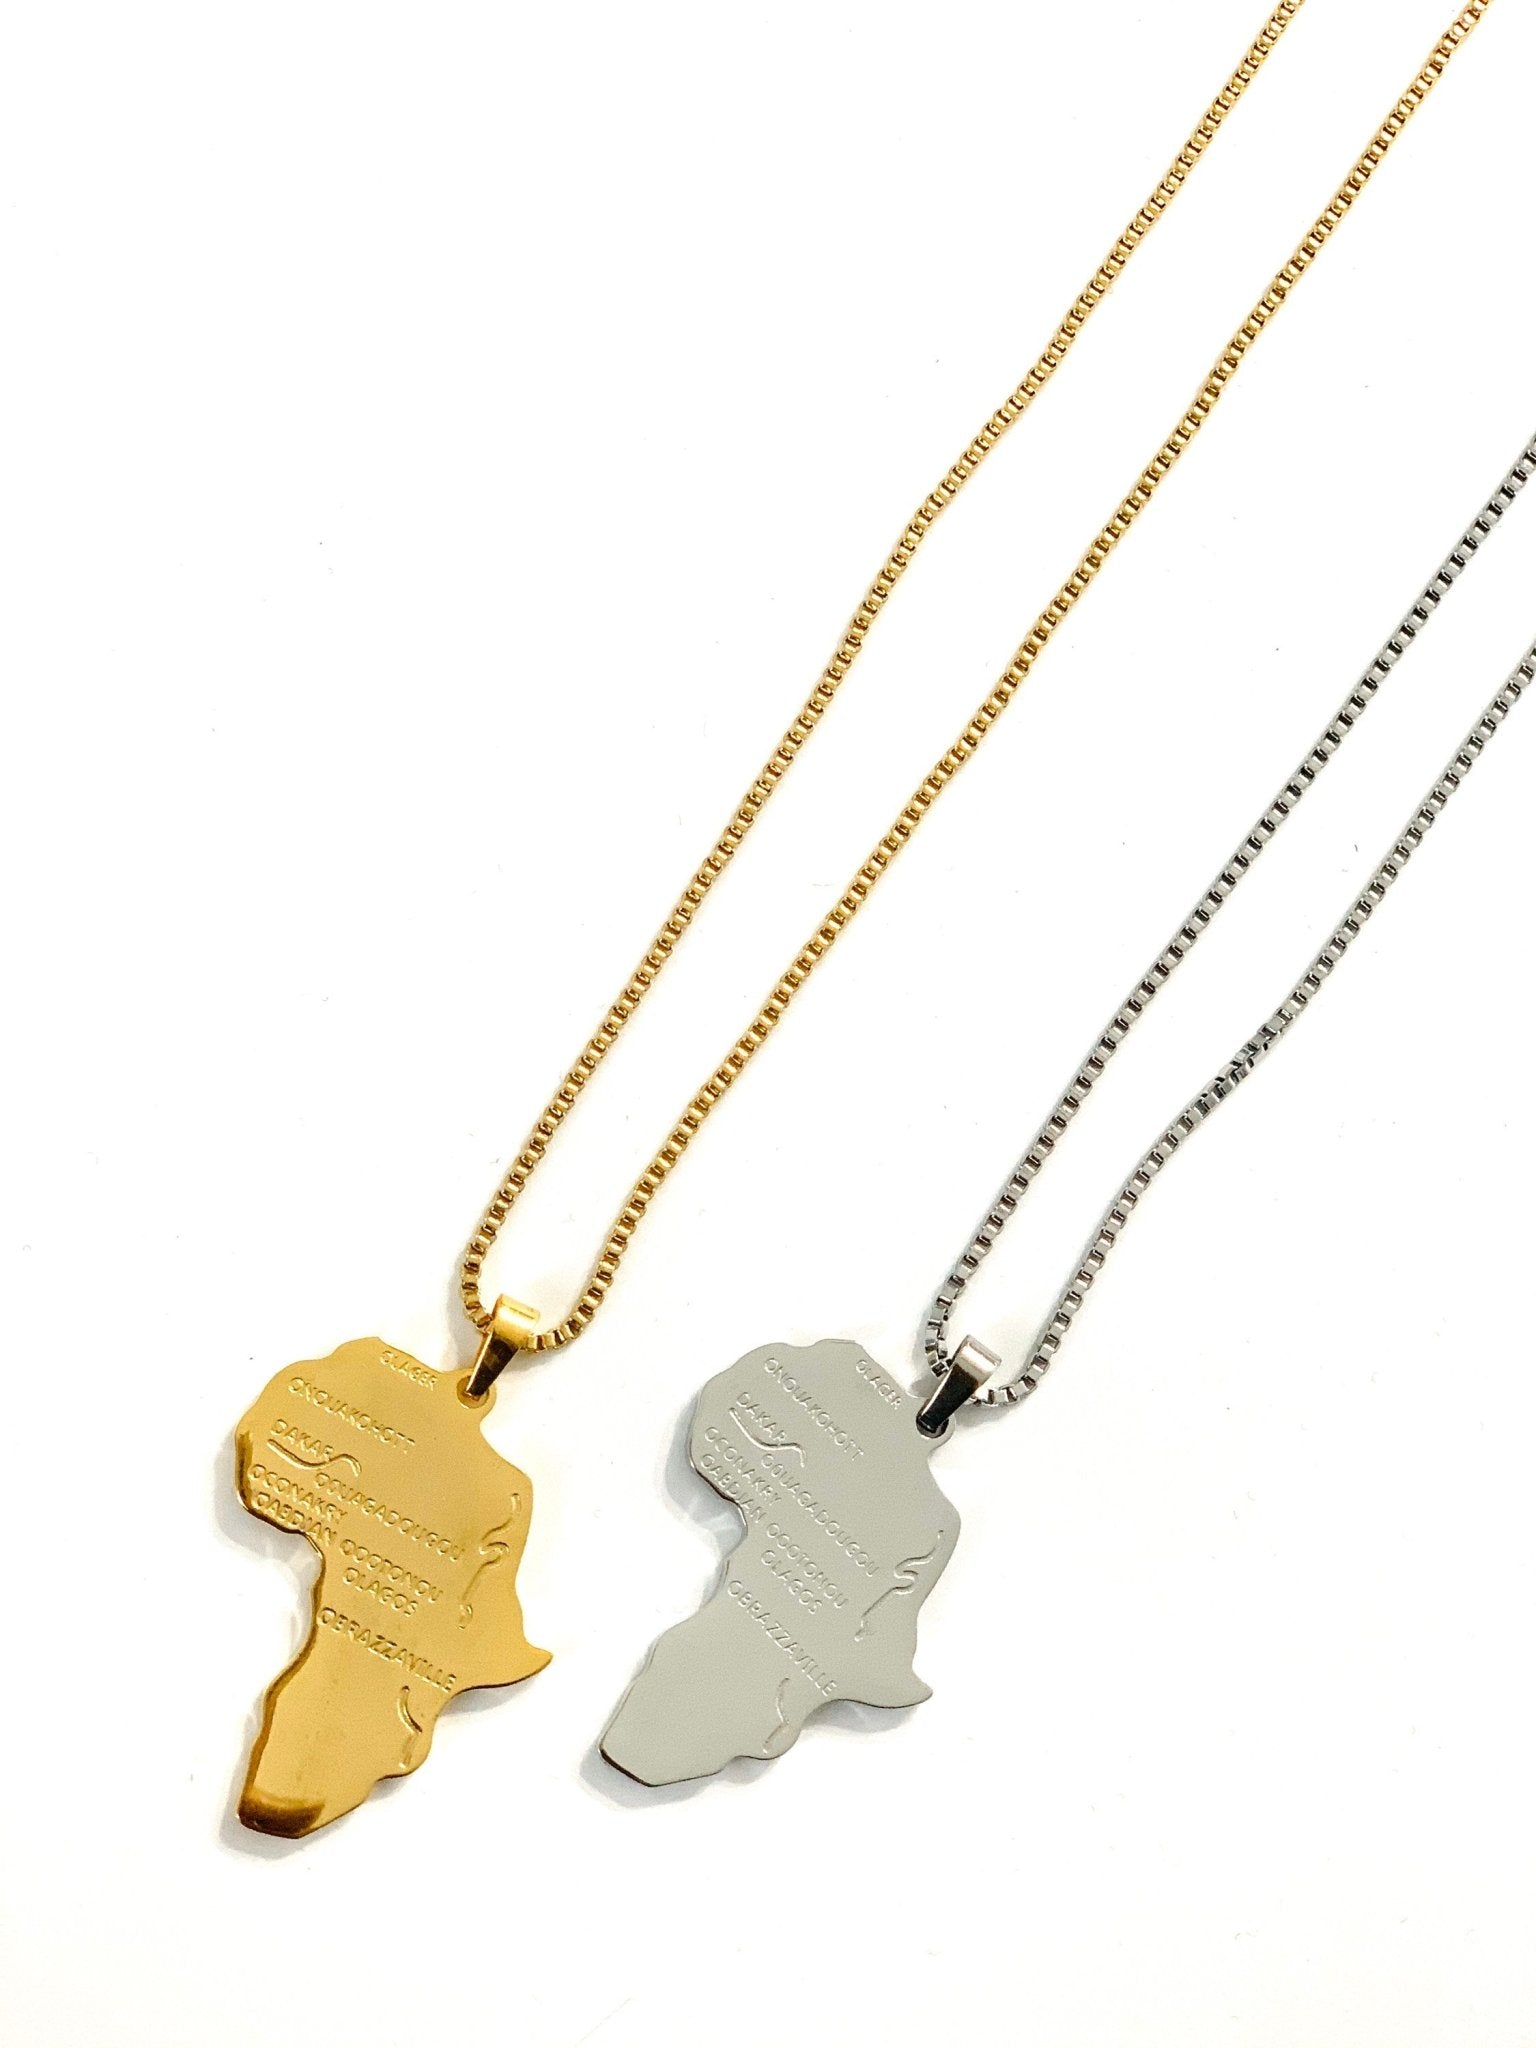 Amazon.com: YKYLHSYXR Women's Minimalist Africa Map Pendant Necklace, Africa  Motherland Continent Outline Necklaces (Jewelry with Gifts Box) (18K GOLD)  : Clothing, Shoes & Jewelry